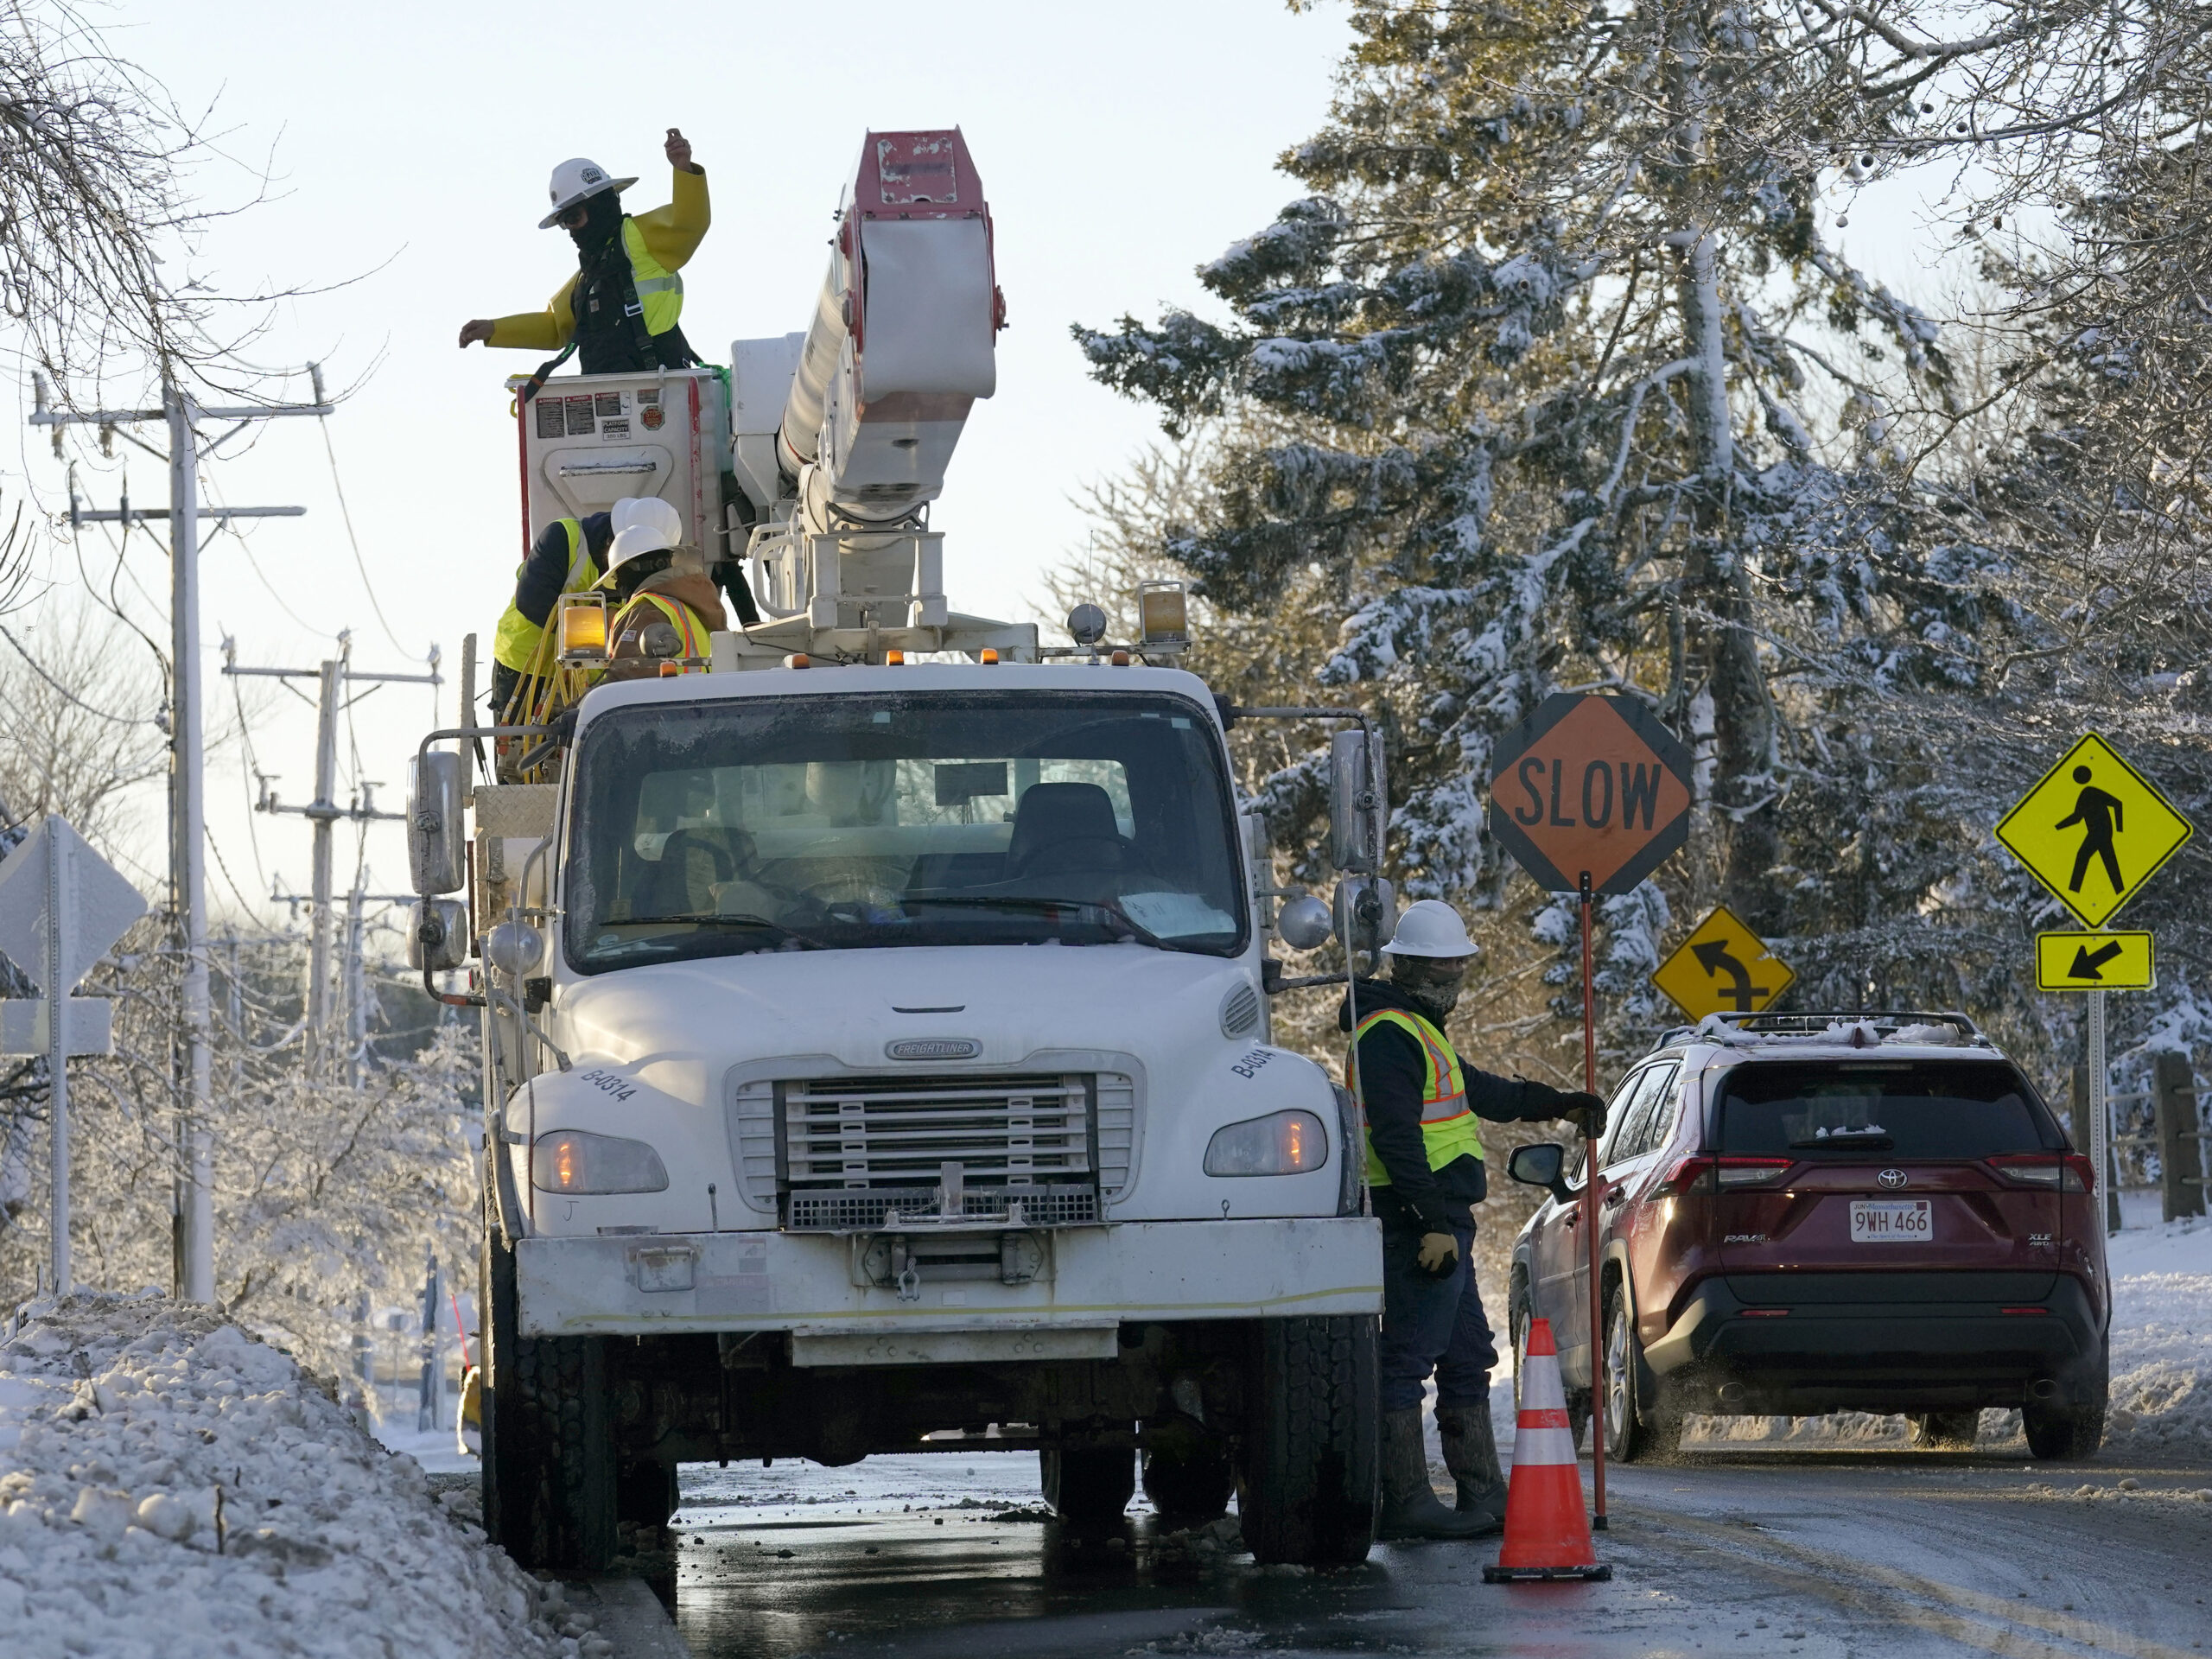 Trucks with cherry pickers help repair damaged power lines, Sunday, Jan. 30, 2022, in Chatham, Mass. An April nor'easter is expected to bring one foot of snow to some places in New England.